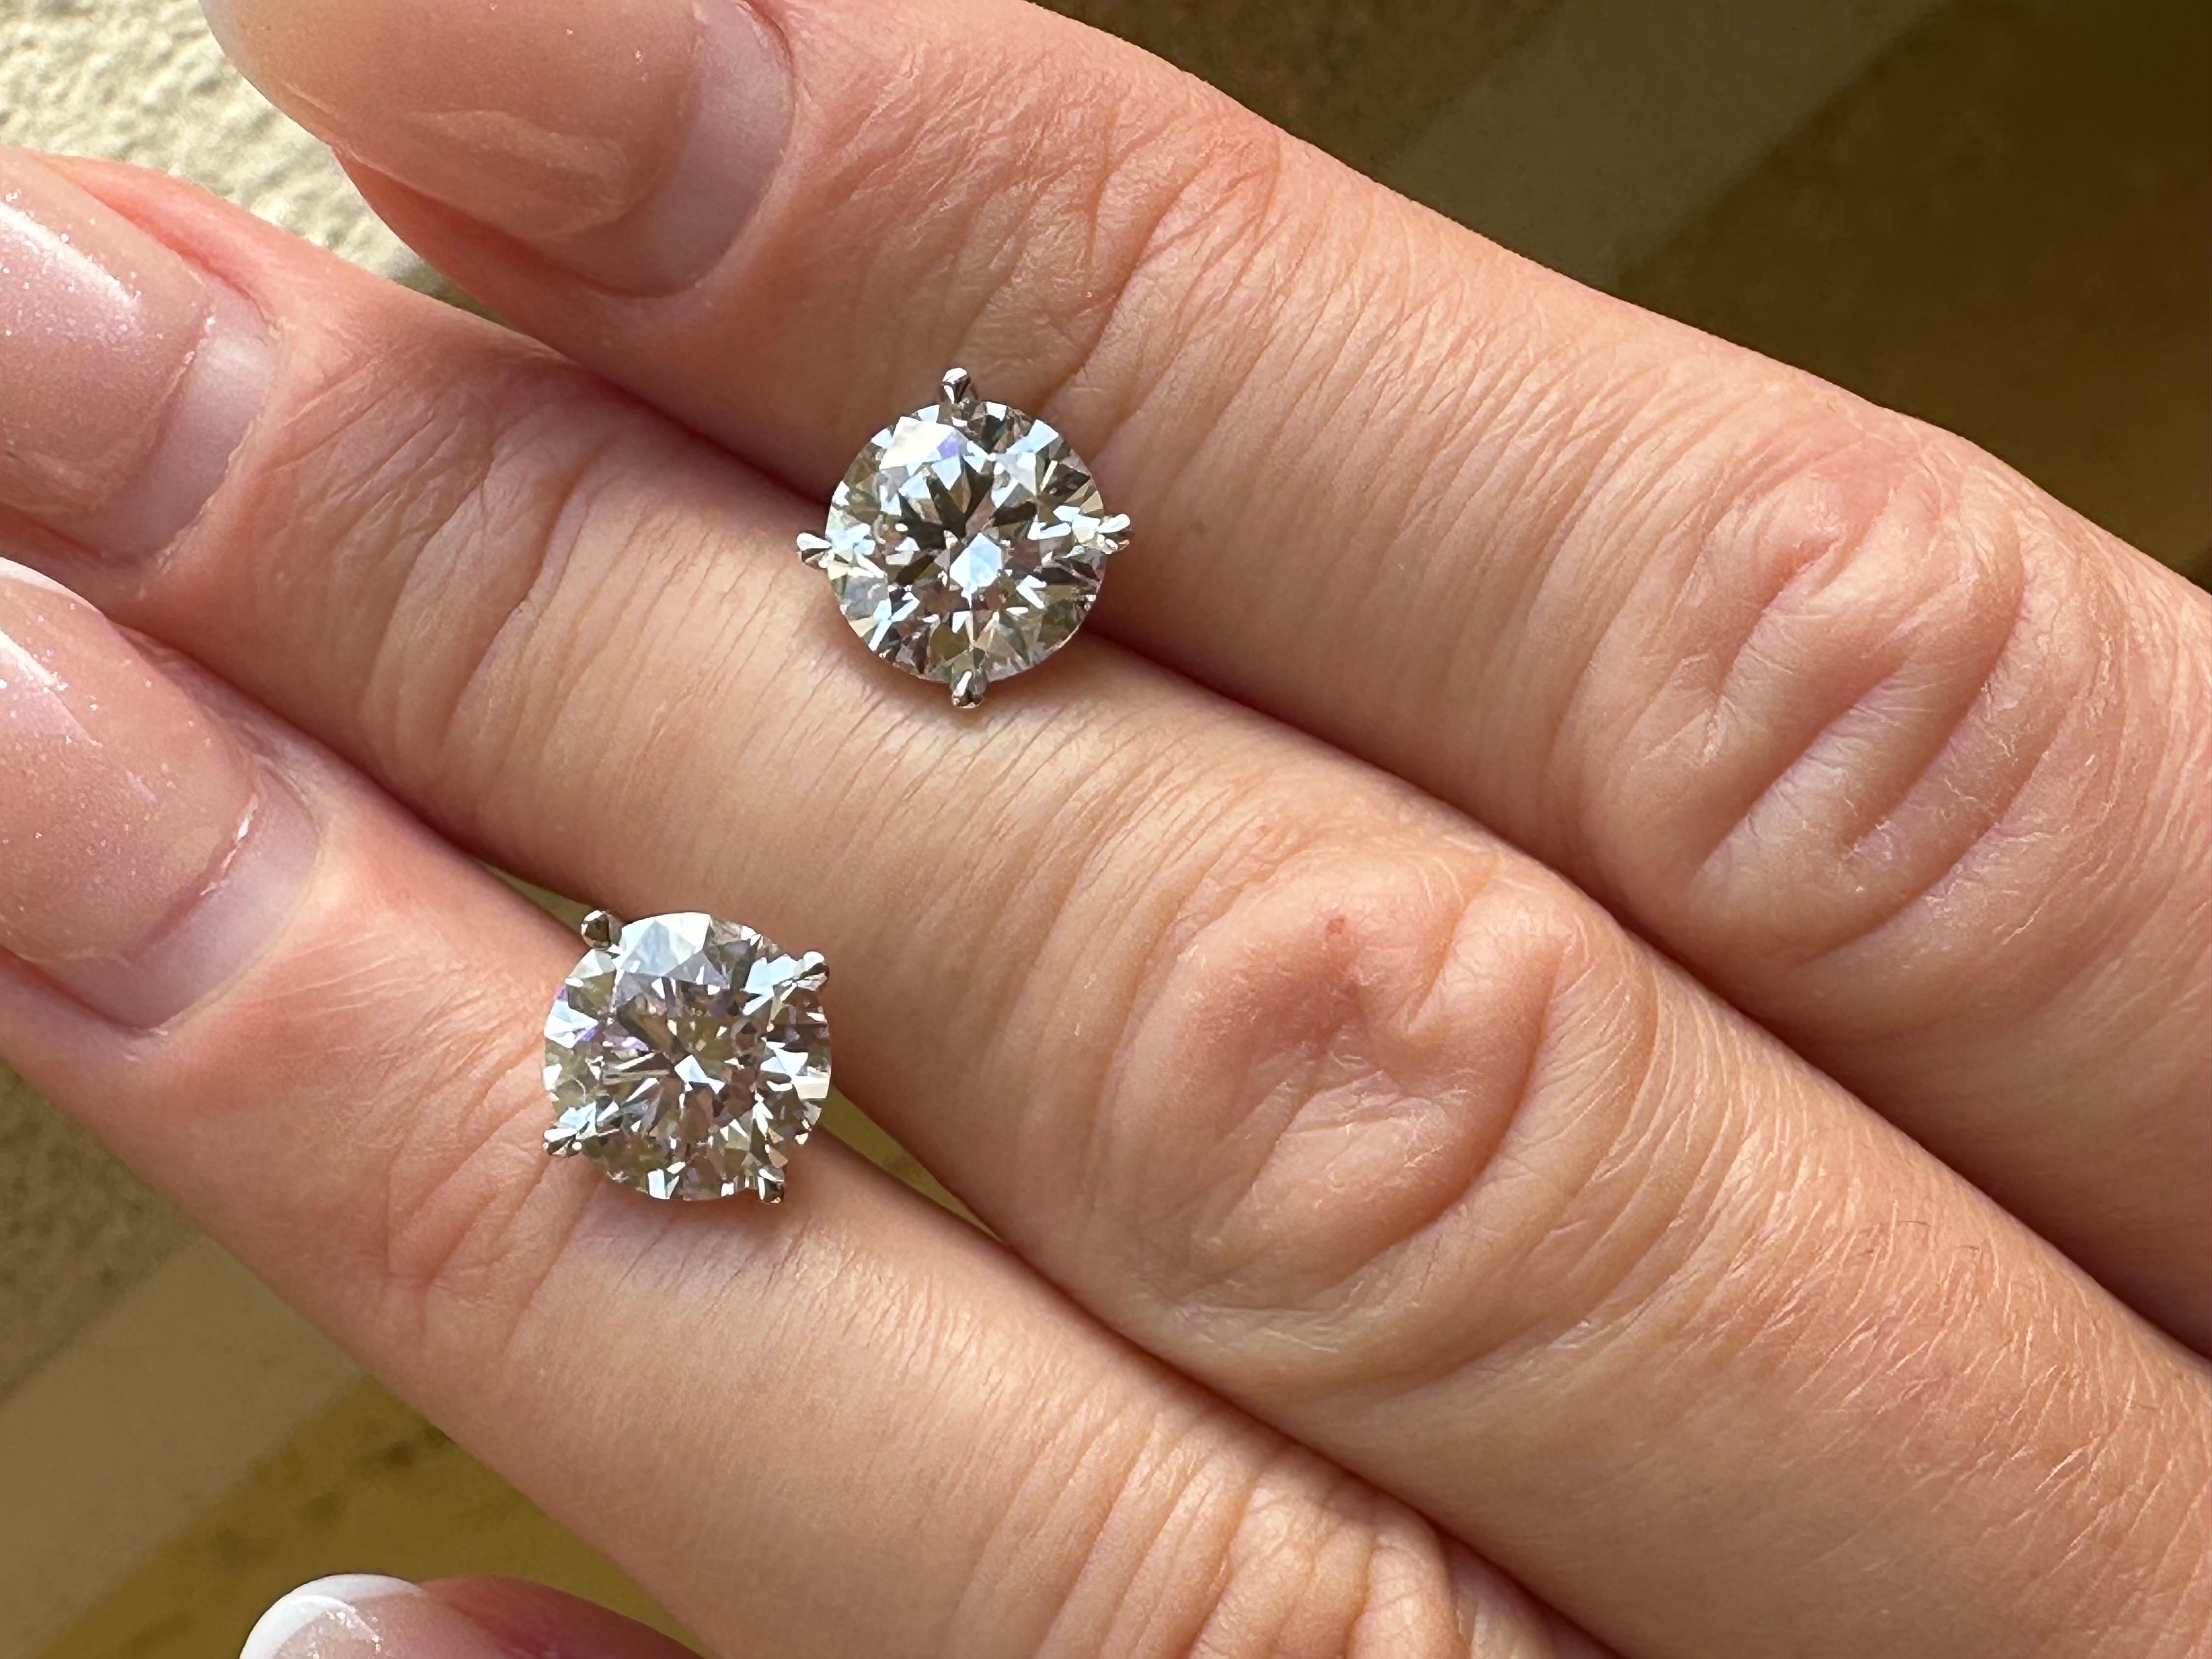 Certified moissanite studs in 14KT white gold, the studs sparkle just like diamonds!

Certificate of authenticity comes with purchase

ABOUT US
We are a family-owned business. Our studio in located in the heart of Boca Raton at the International